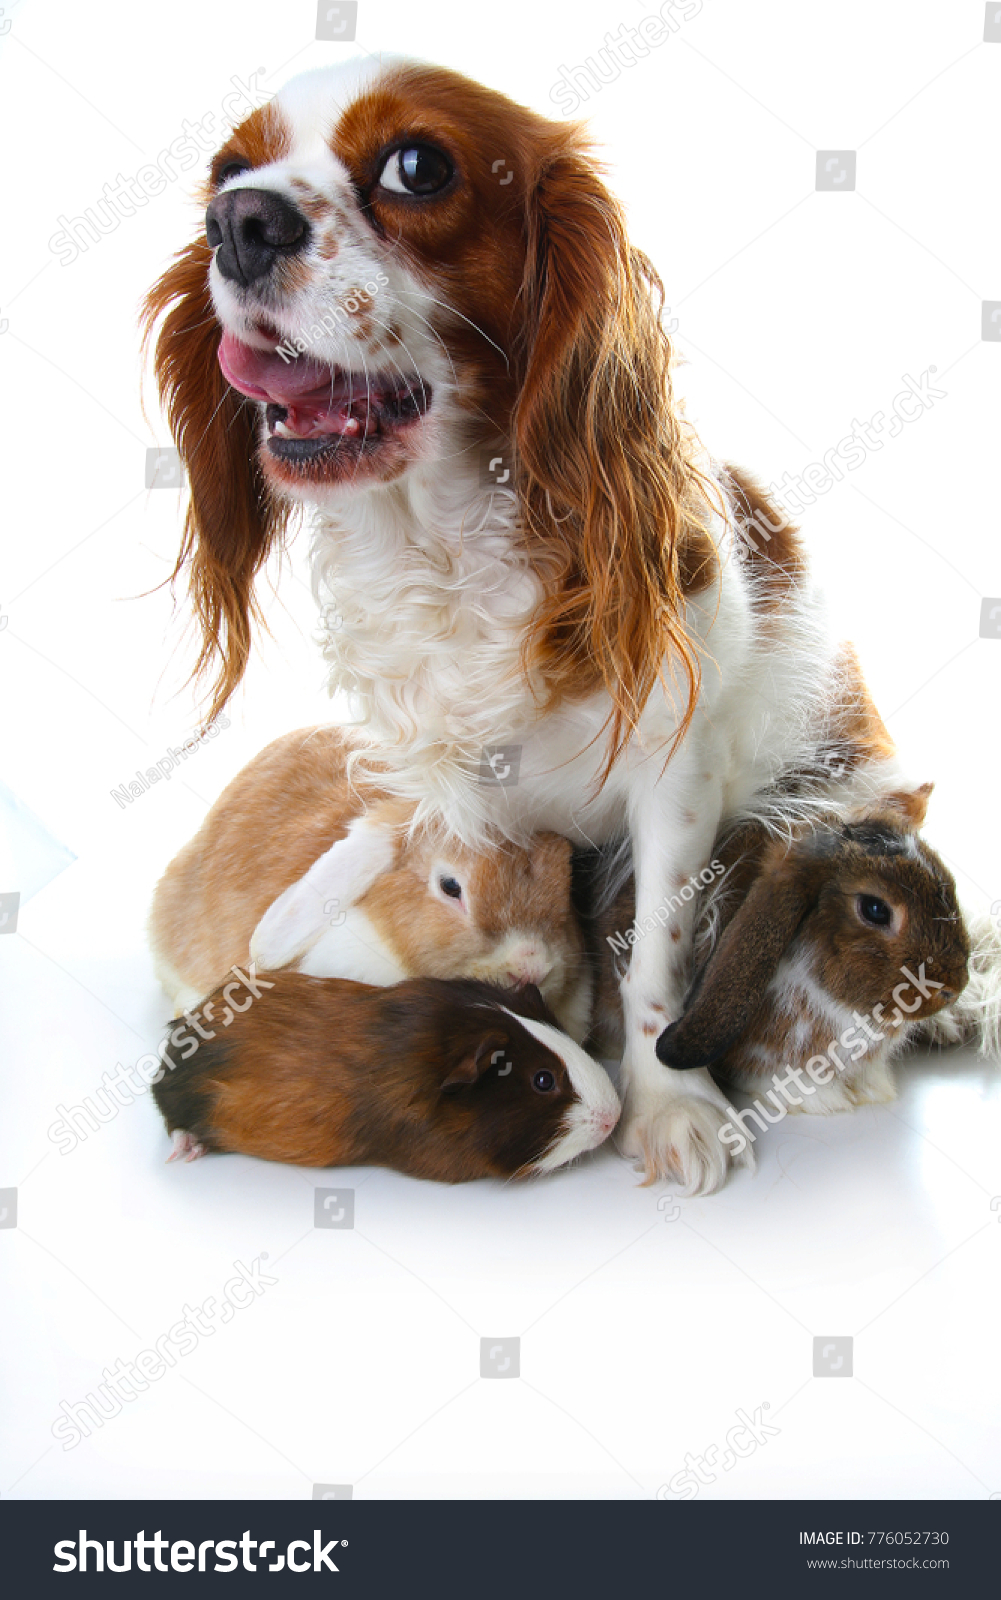 Animal friends. True pet friends. Dog rabbit bunny lop animals together on isolated white studio background. Pets love each other. #776052730